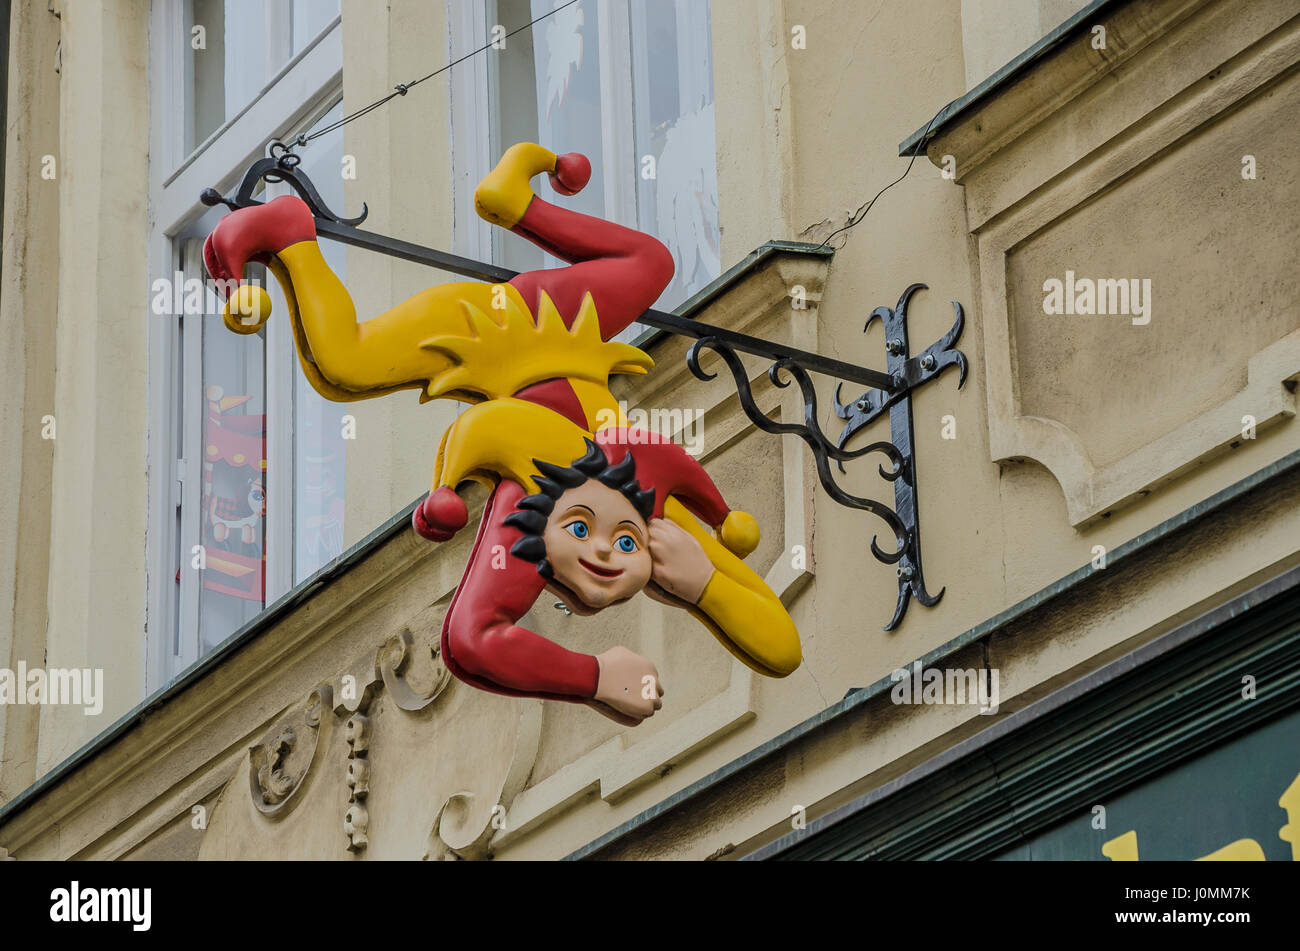 Zlateho High Resolution Stock Photography and Images - Alamy